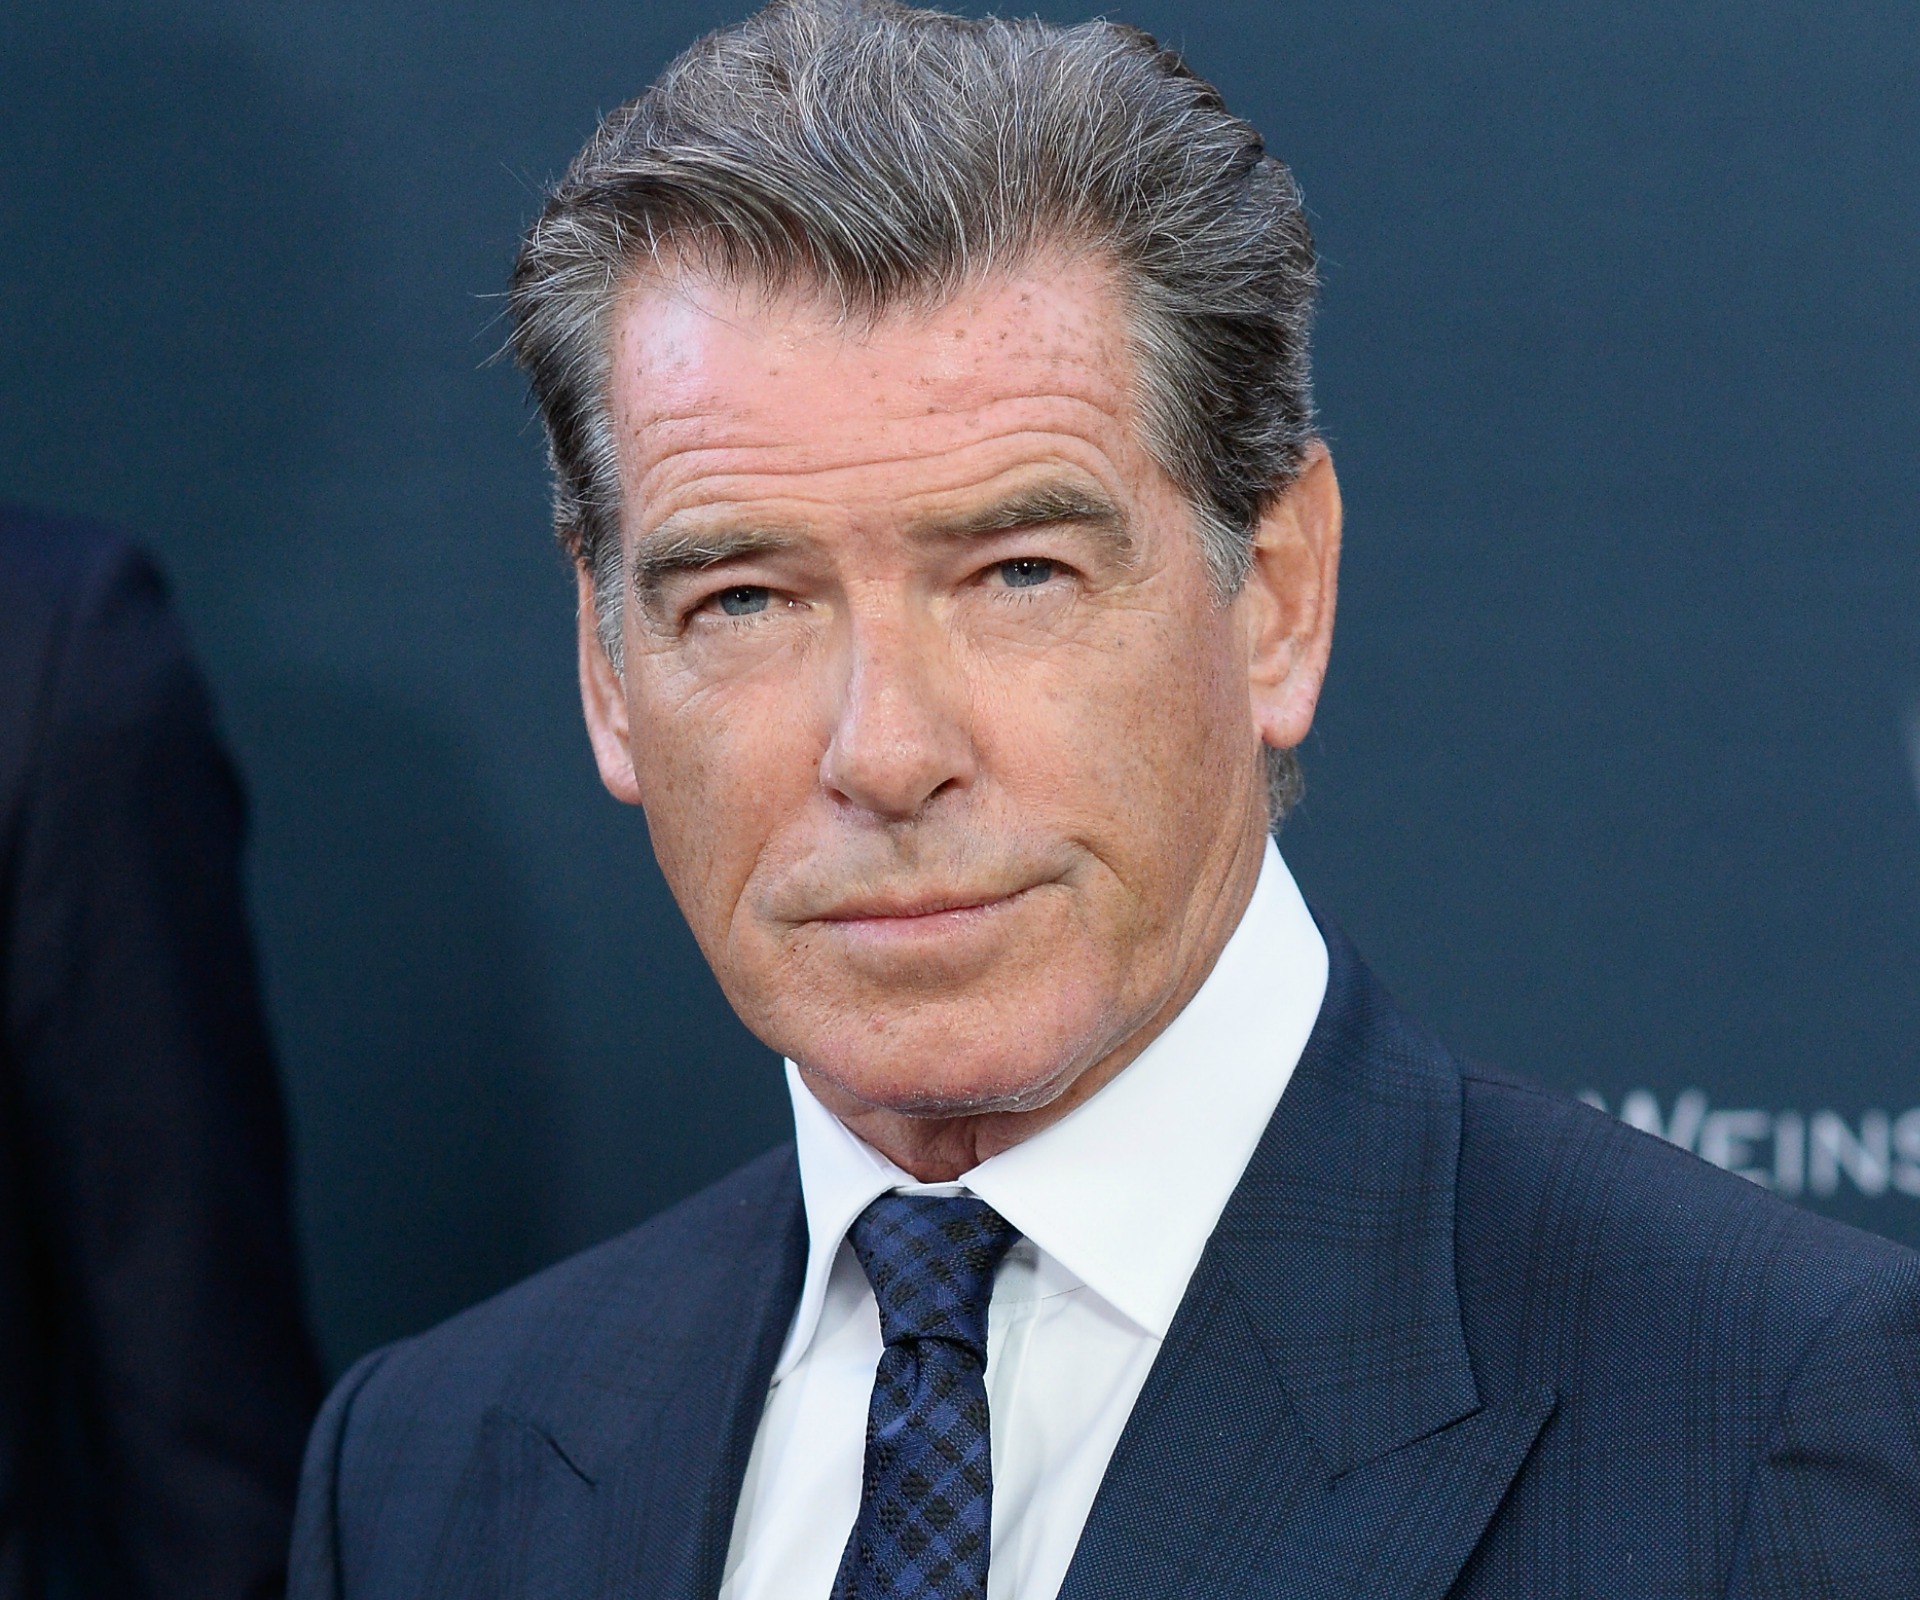 Pierce Brosnan on the heartbreaking loss of his first wife and daughter to ovarian cancer